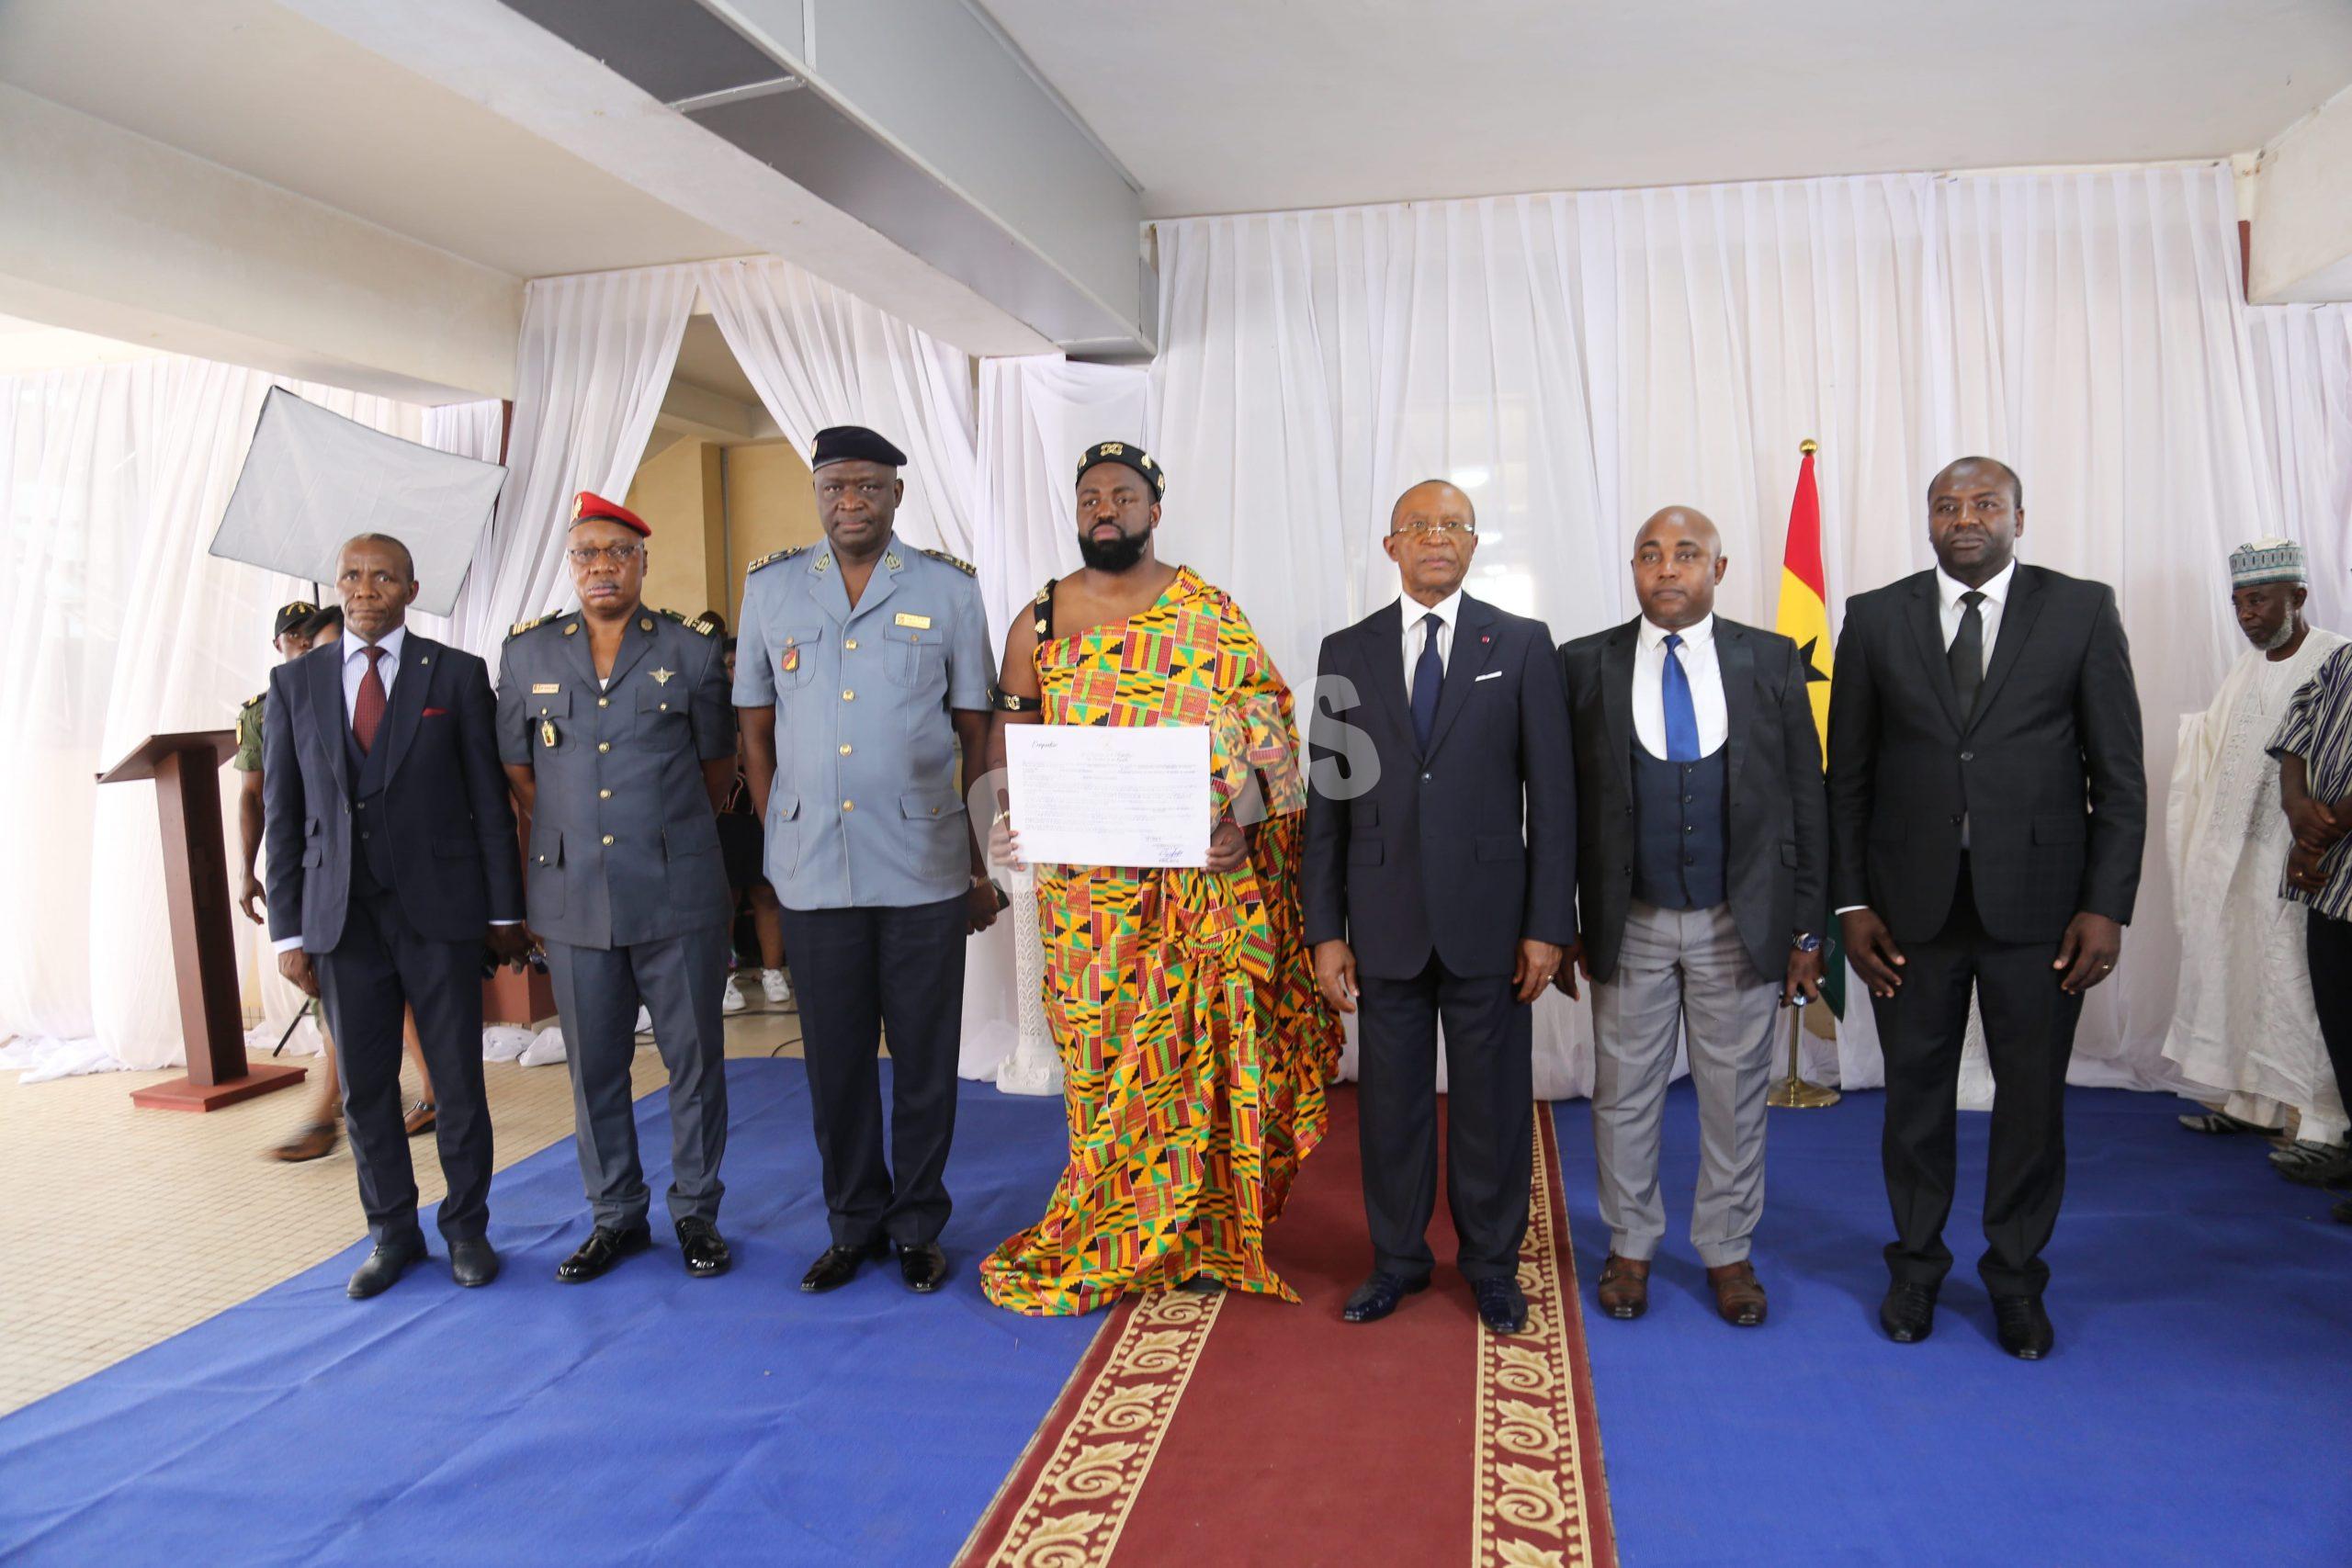 Prof Tih's son installed as honorary consol of the Republic of Ghana to Cameroon